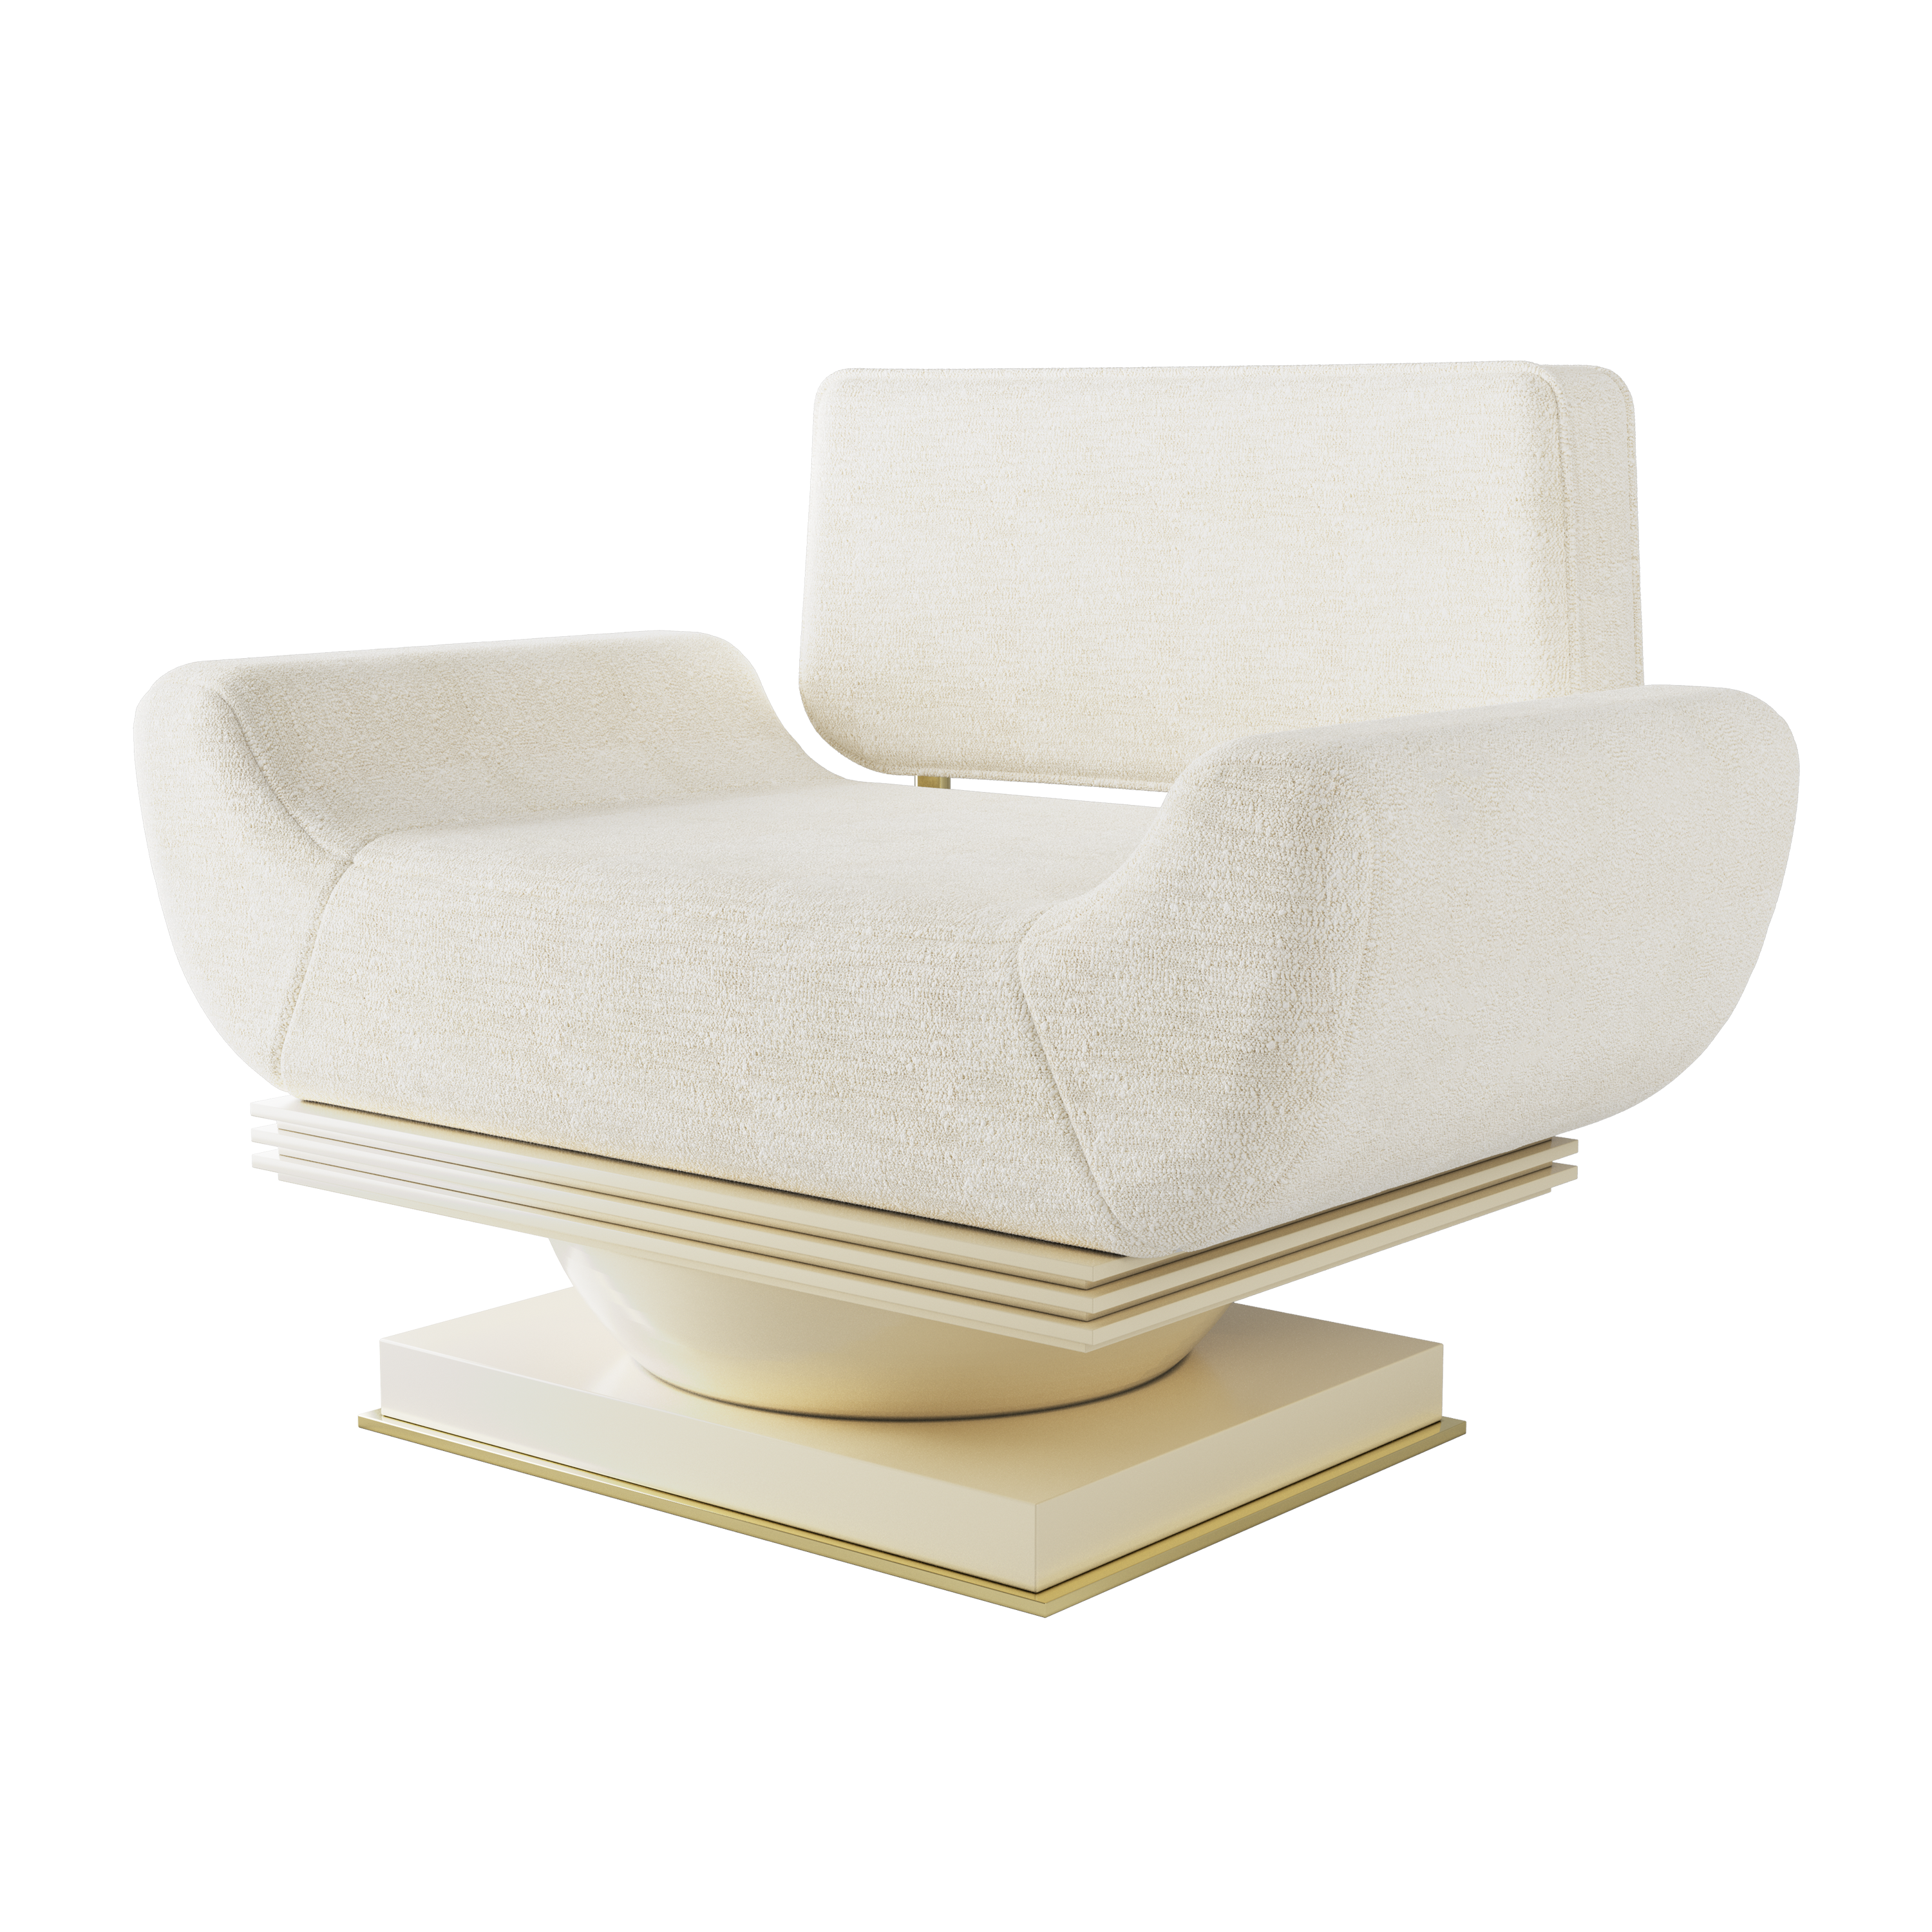 luxury-ecletic-armchair-for-a-contemporary-interior-design-project